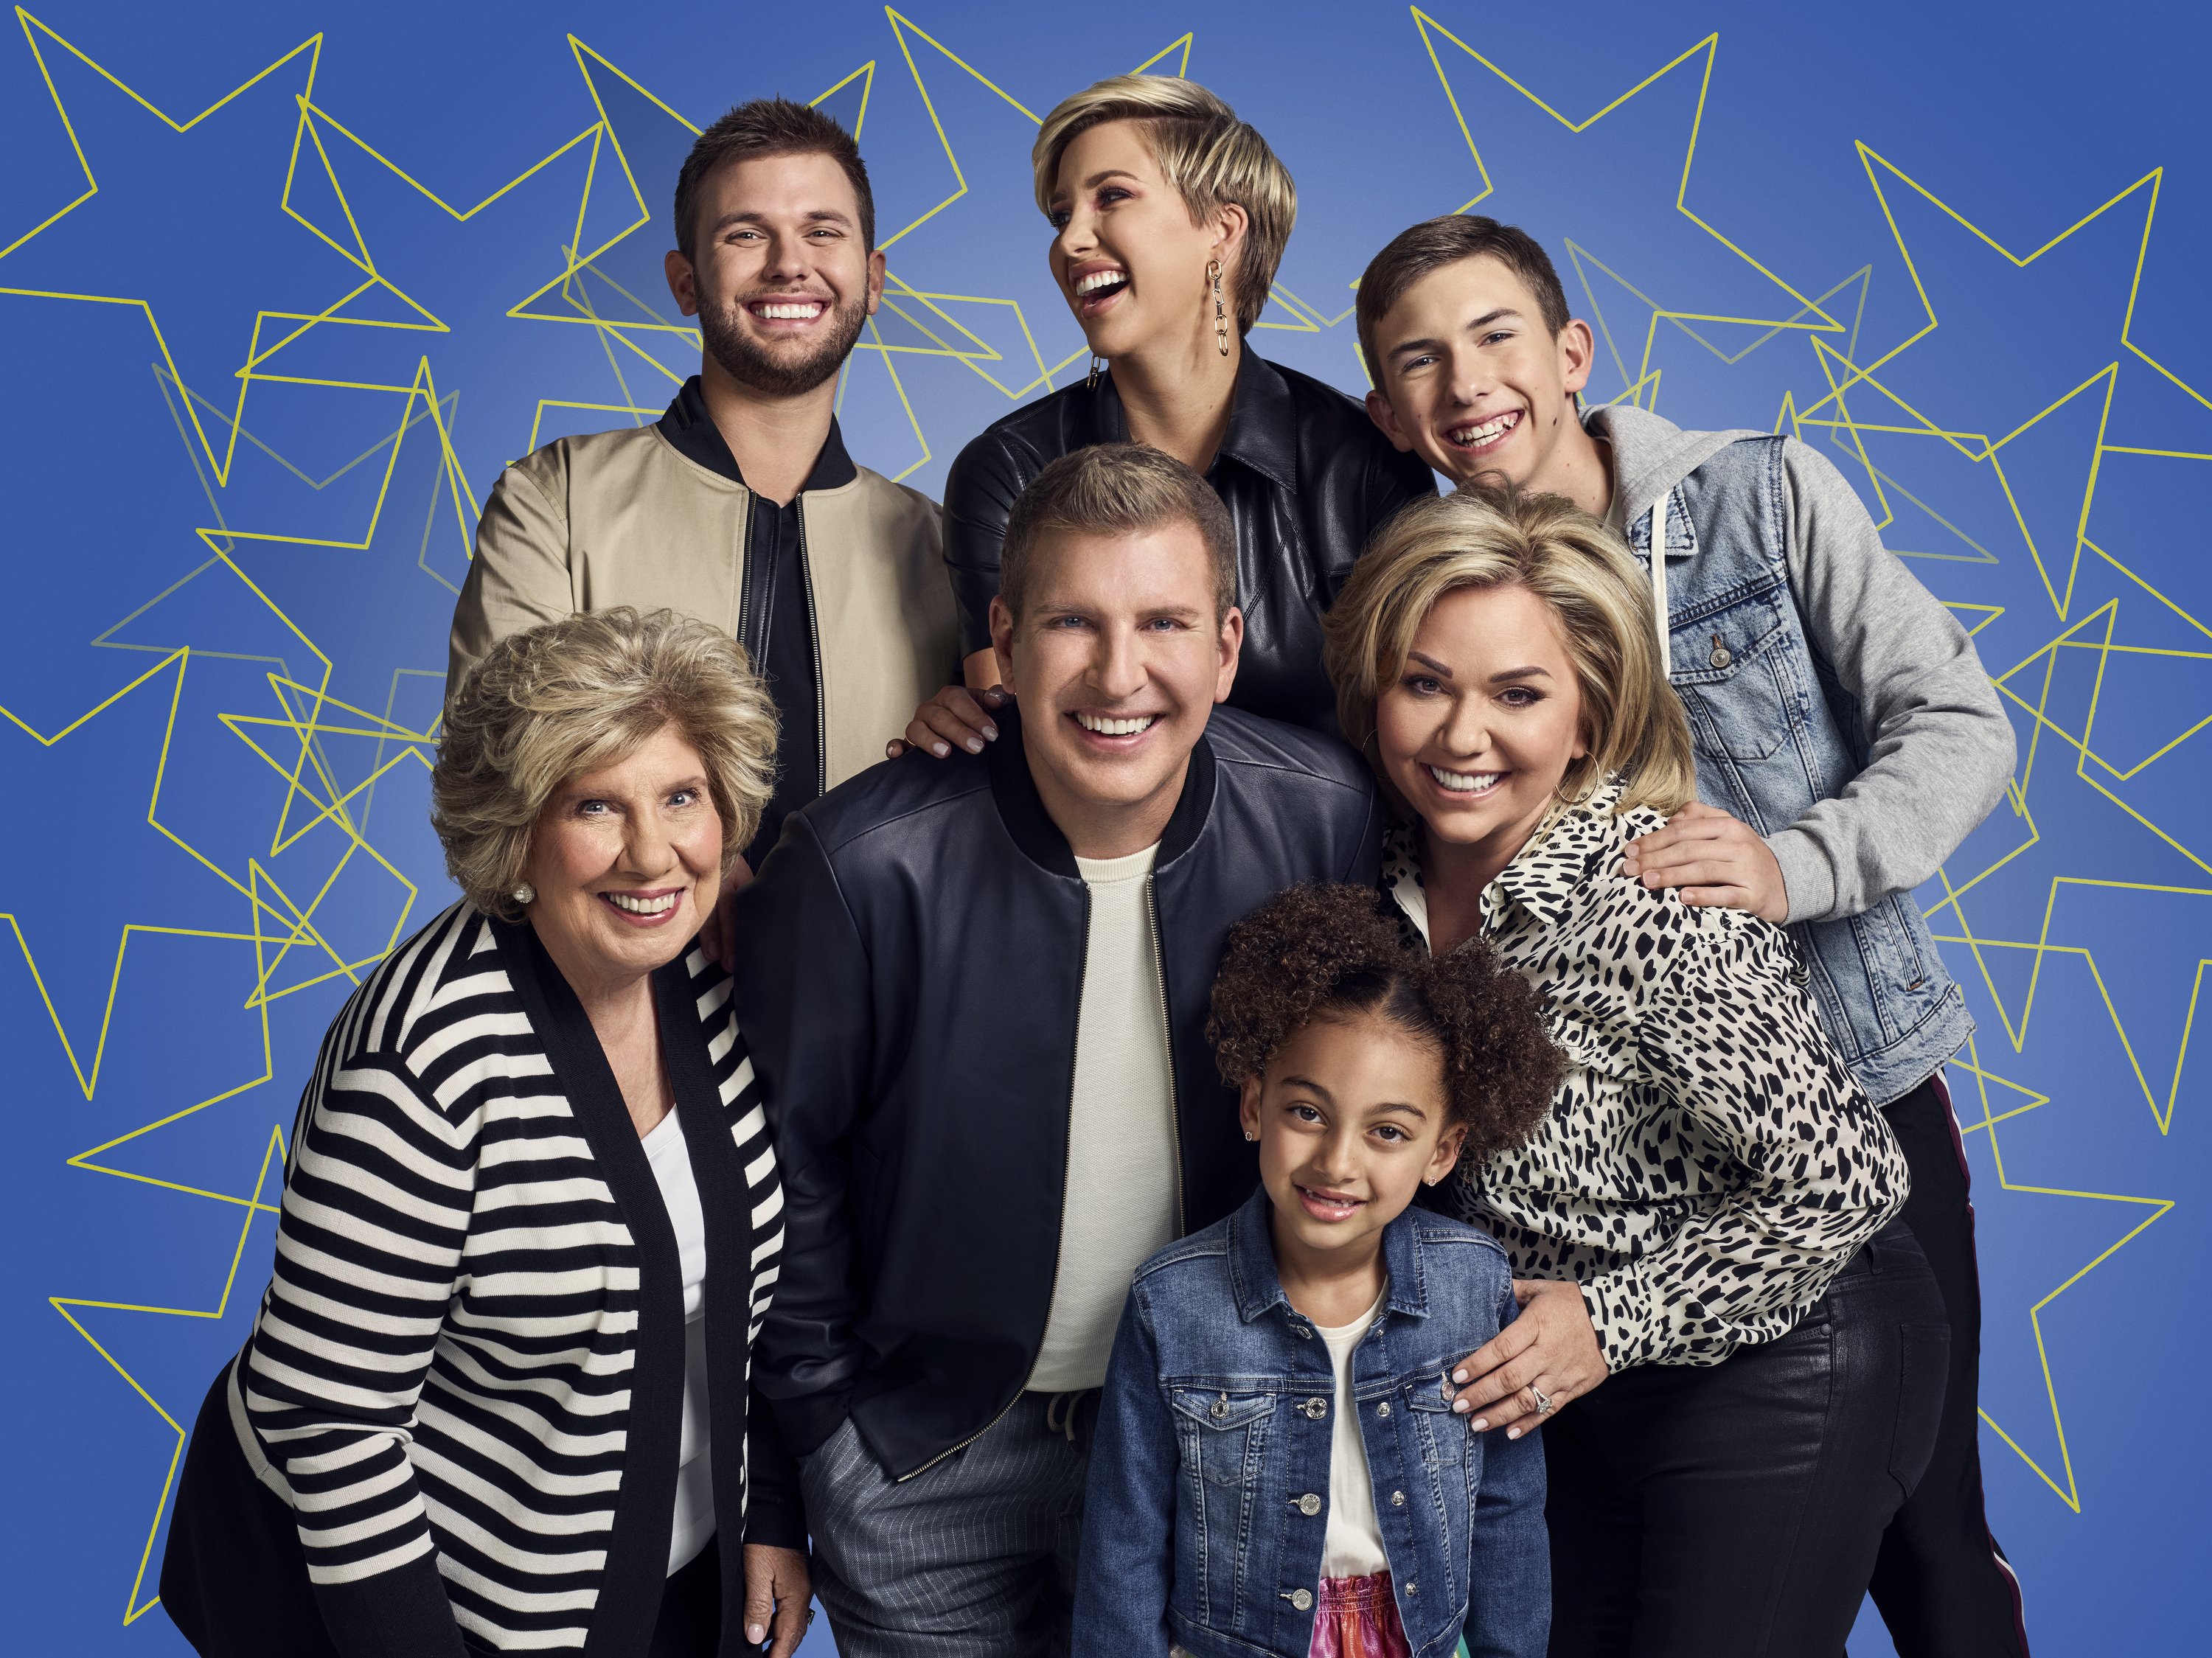 Faye Chrisley, Chase Chrisley, Todd Chrisley, Savannah Chrisley, Chloe Chrisley, Julie Chrisley, Grayson Chrisley  on the "Chrisley Knows Best" cover | Photo: Getty Images